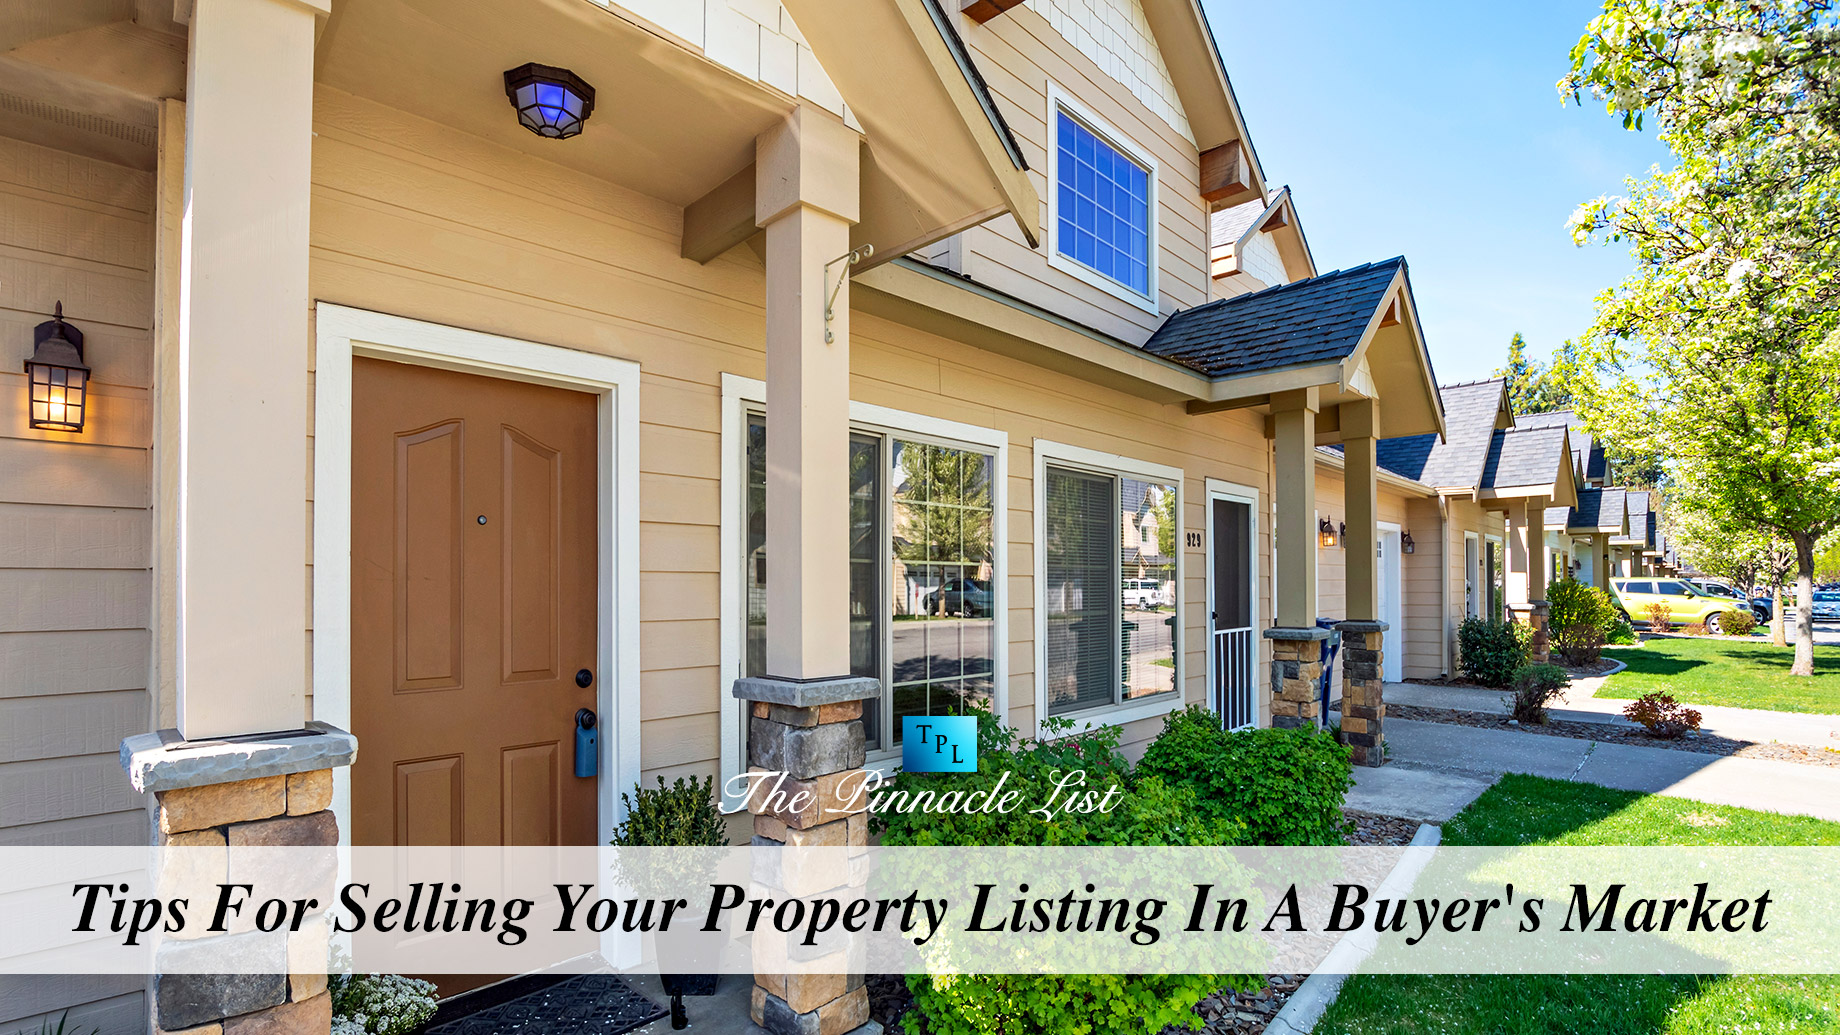 Tips For Selling Your Property Listing In A Buyer's Market